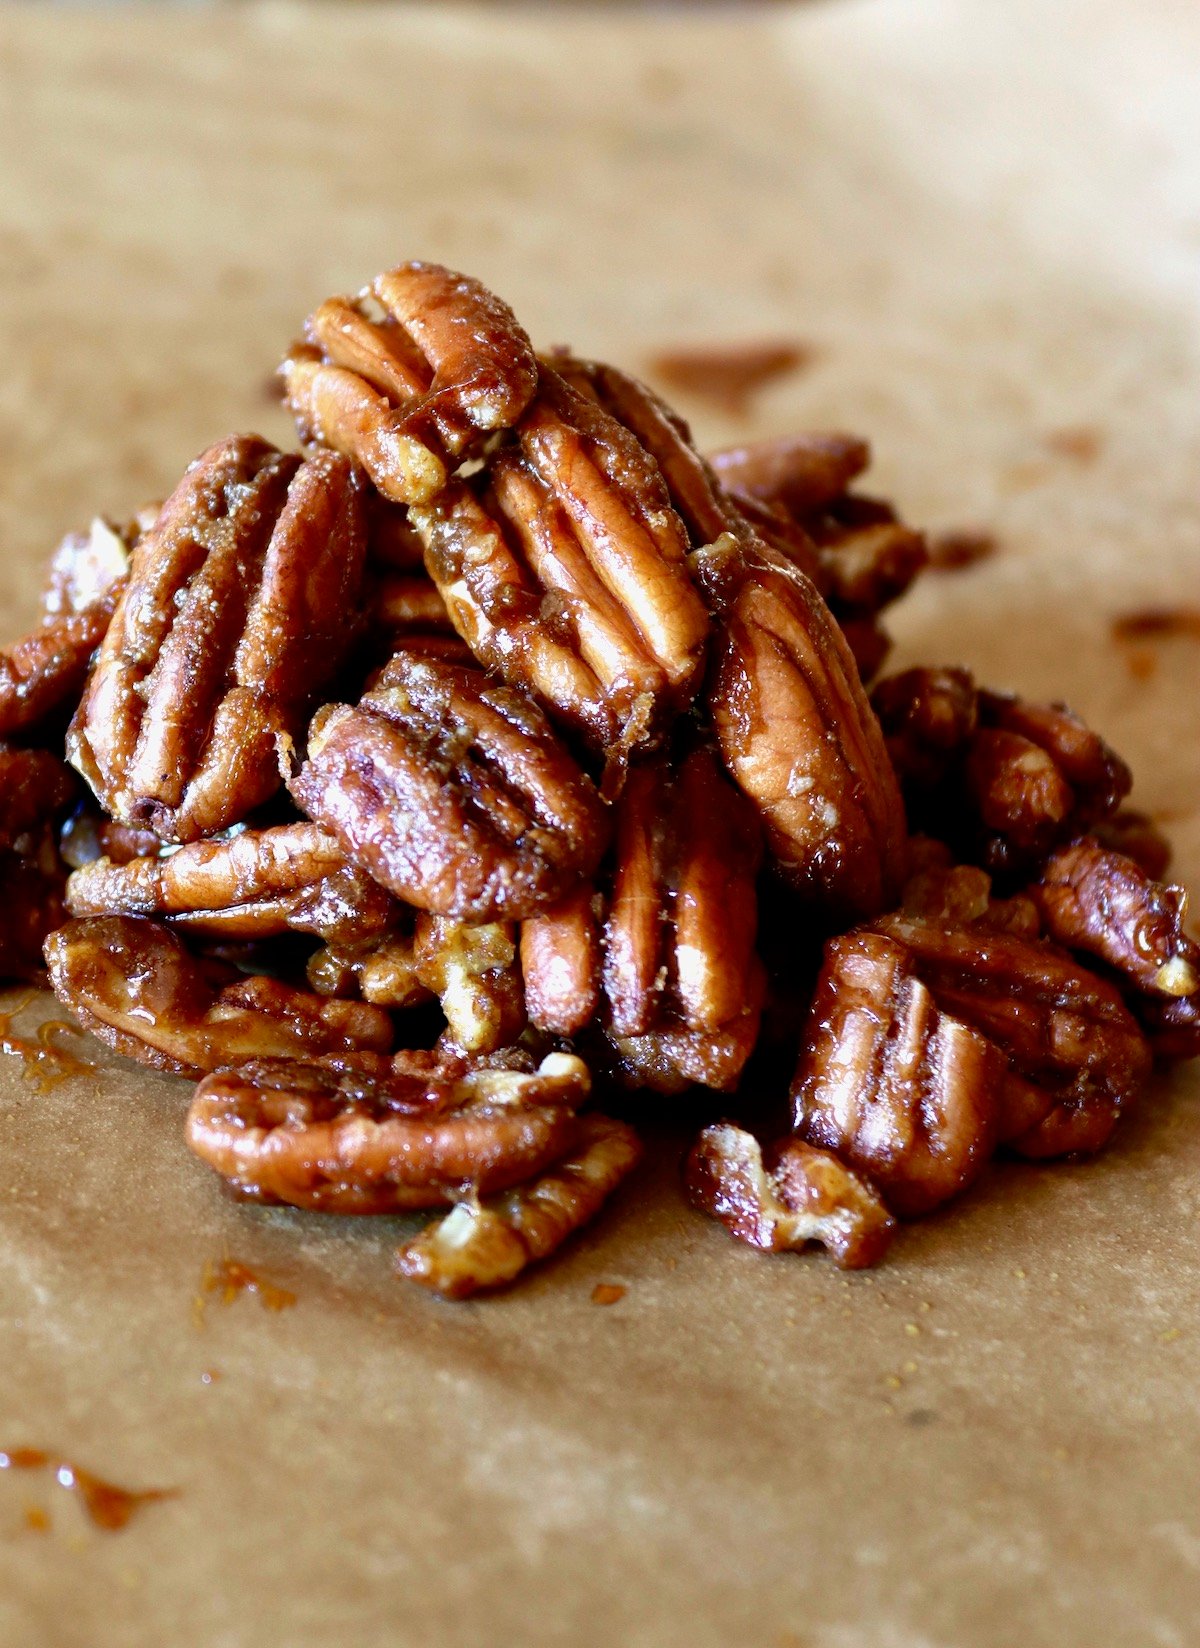 Small pile of caramelized spiced pecans on parchment